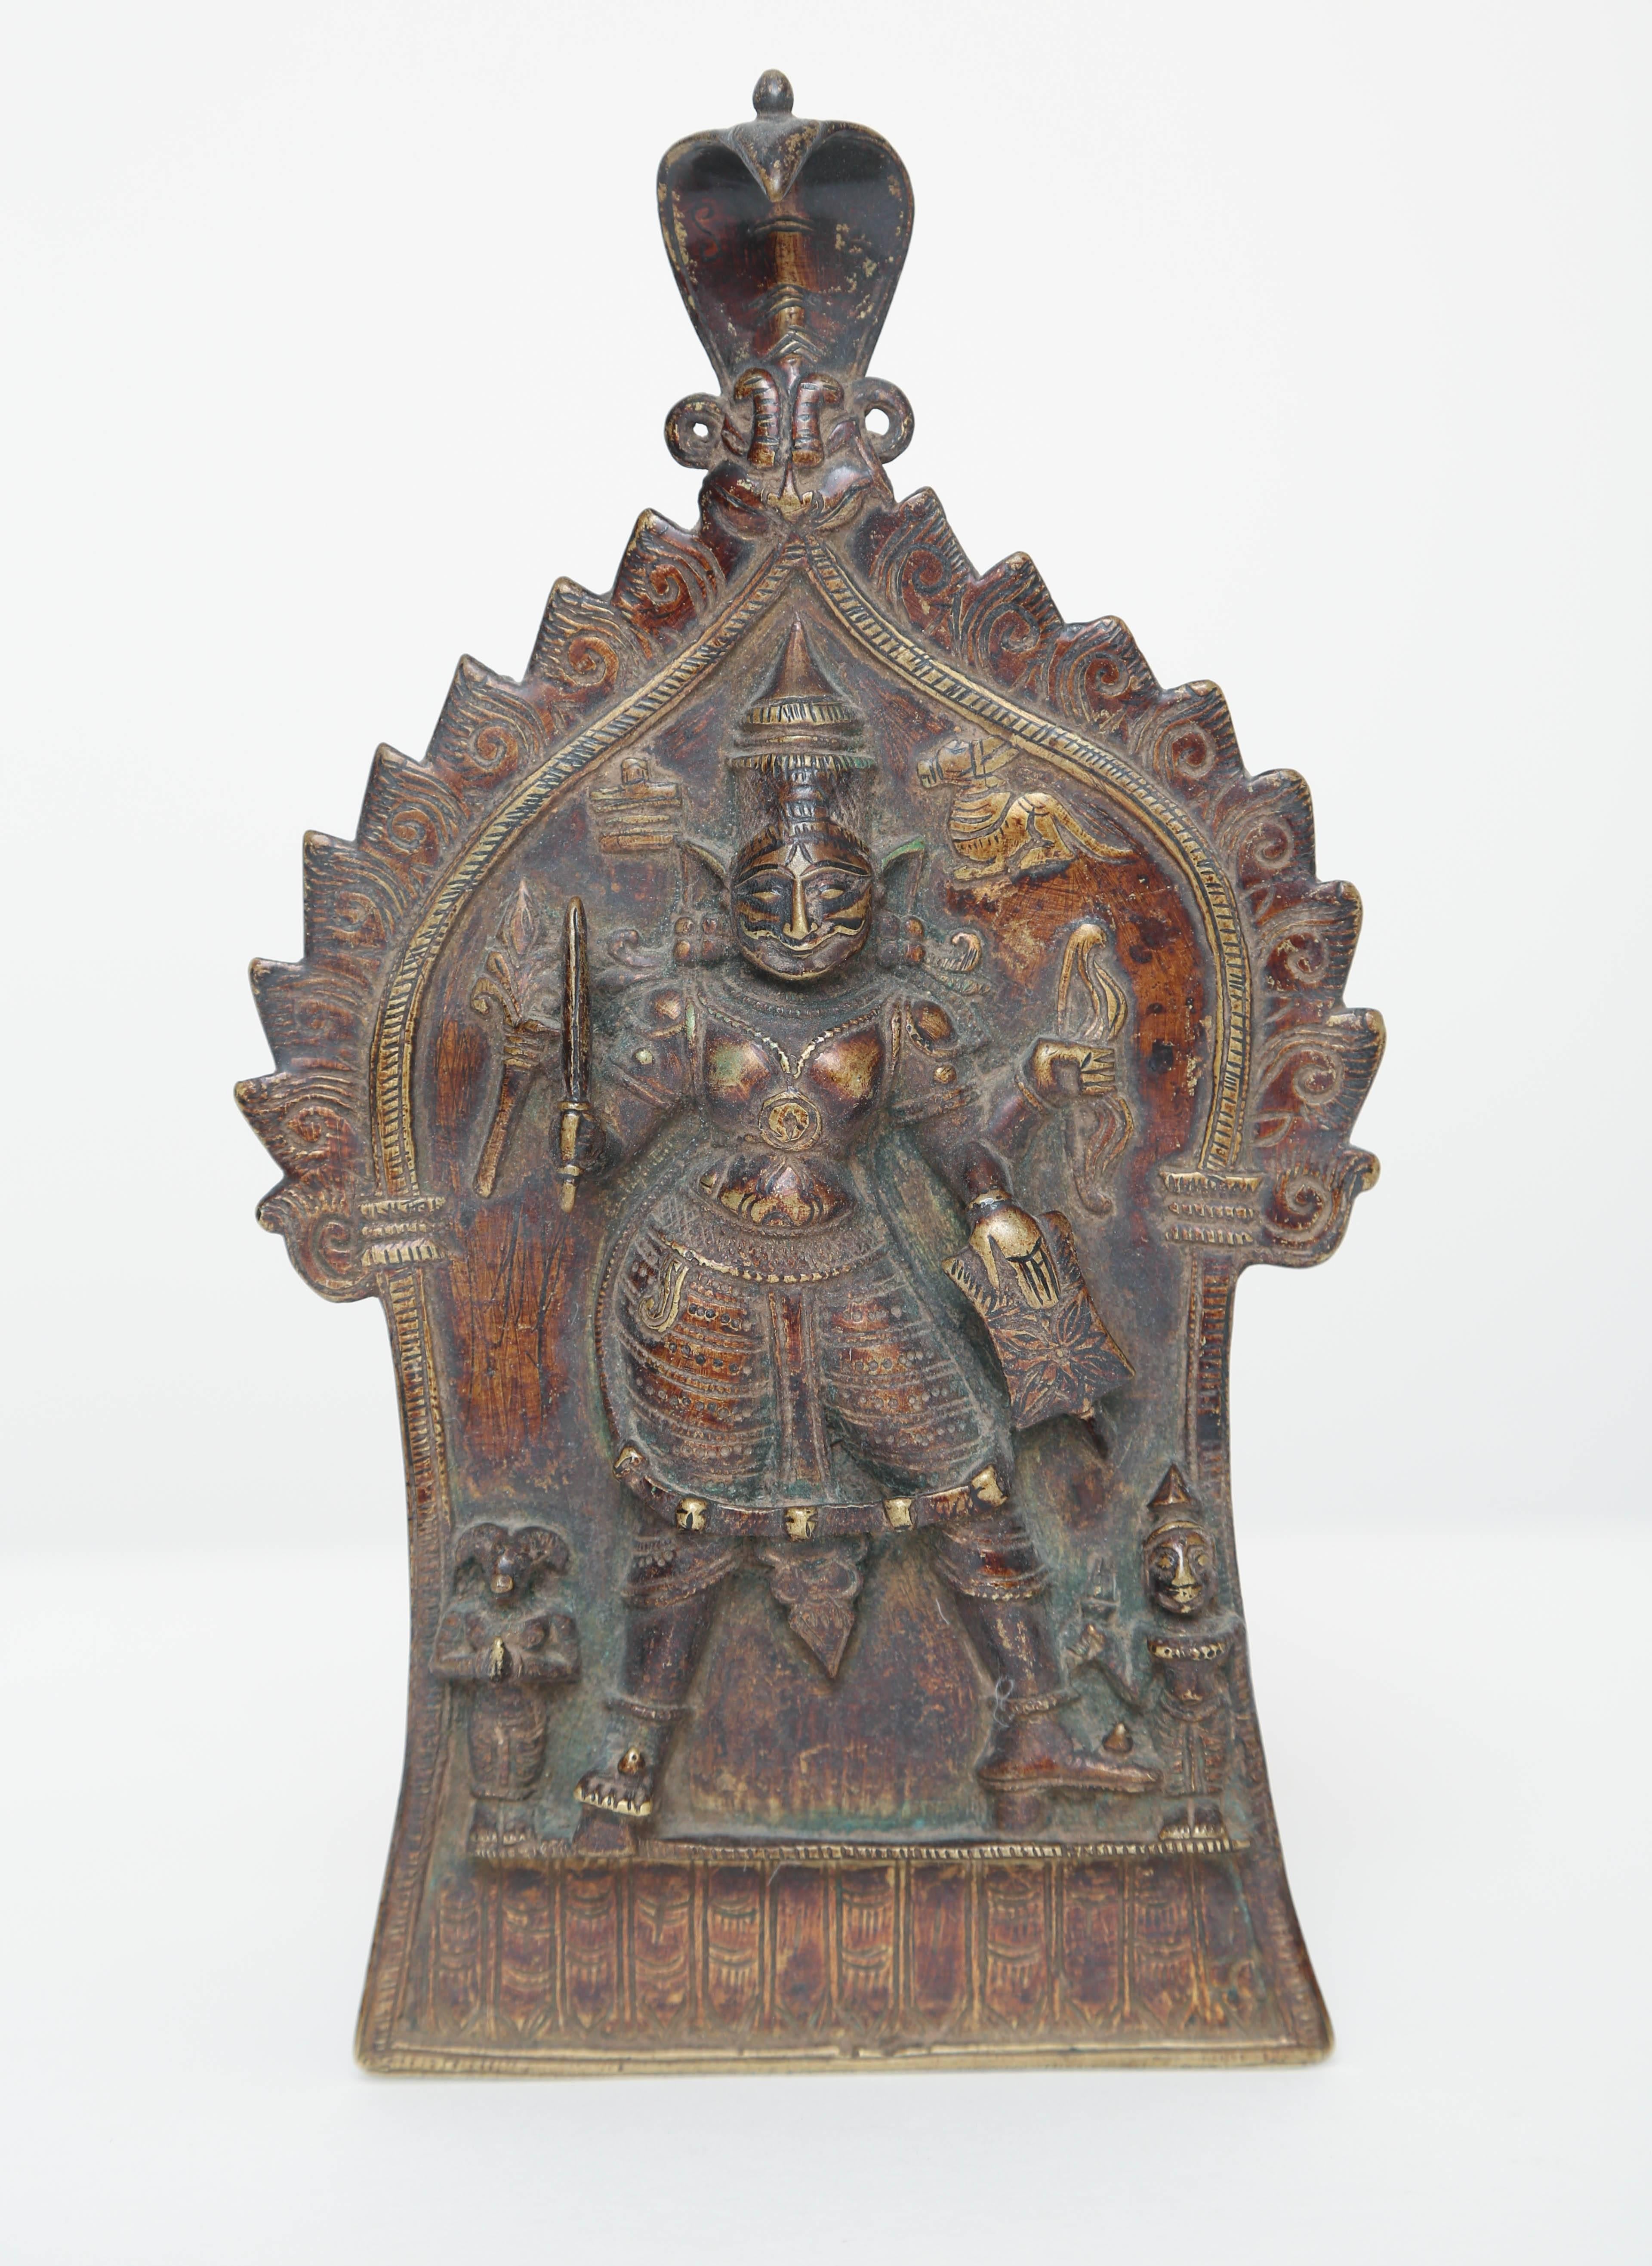 Durga is the warrior goddess in the Hindu culture, she is the protector of the good depicted here mulit-armed with a sword, shield, bow and arrow, astride two male attendants all set within a temple with the sacred cobra presiding above.